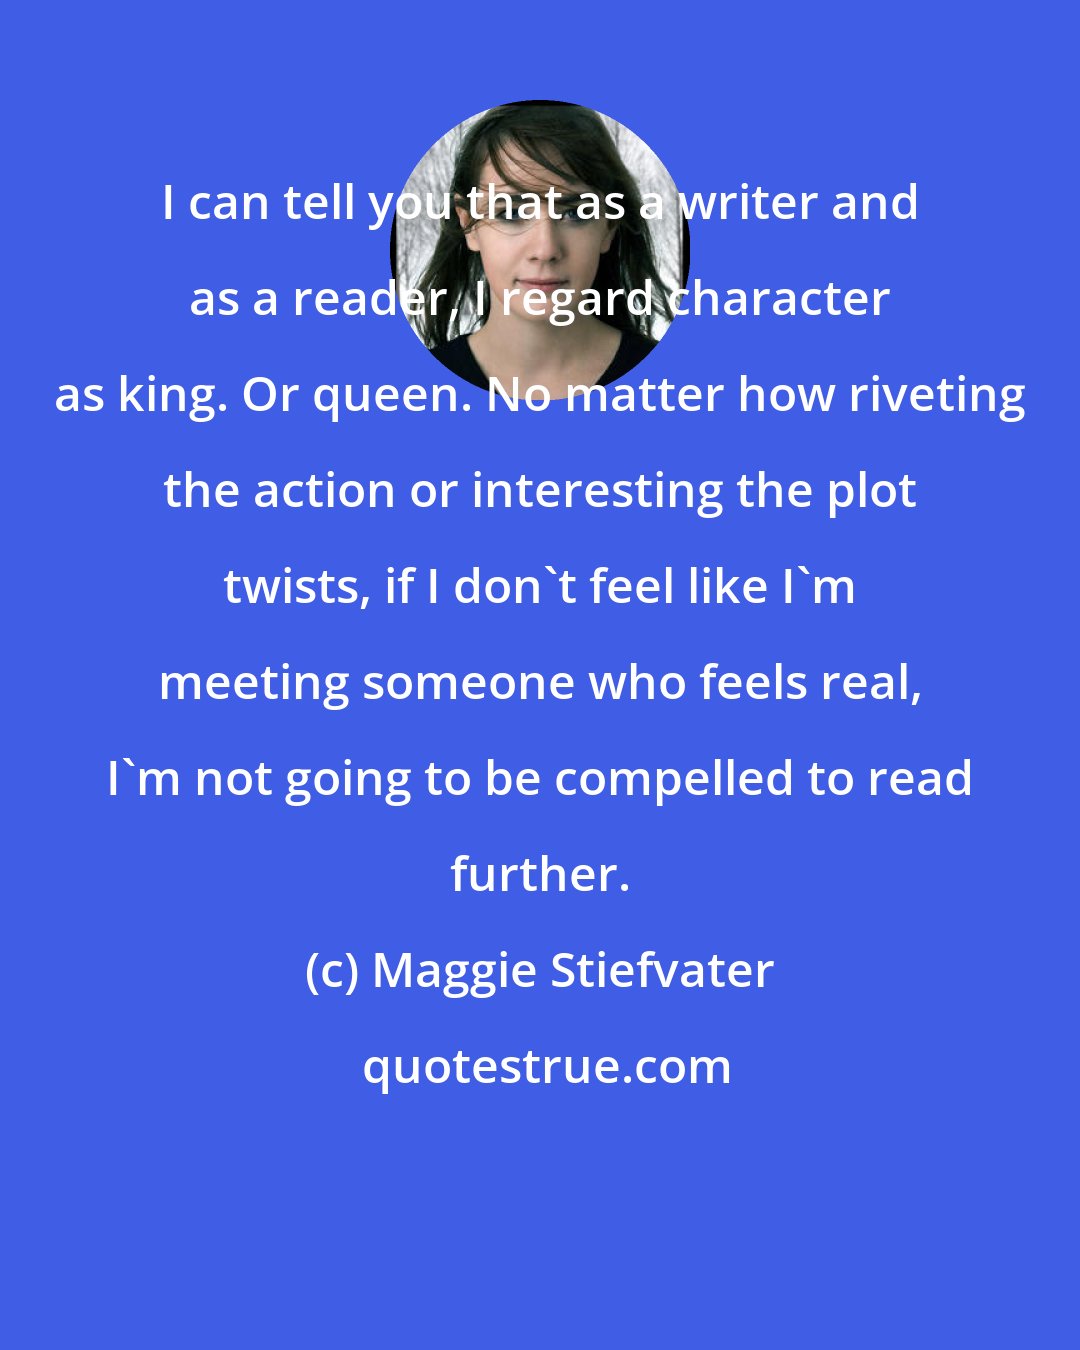 Maggie Stiefvater: I can tell you that as a writer and as a reader, I regard character as king. Or queen. No matter how riveting the action or interesting the plot twists, if I don't feel like I'm meeting someone who feels real, I'm not going to be compelled to read further.